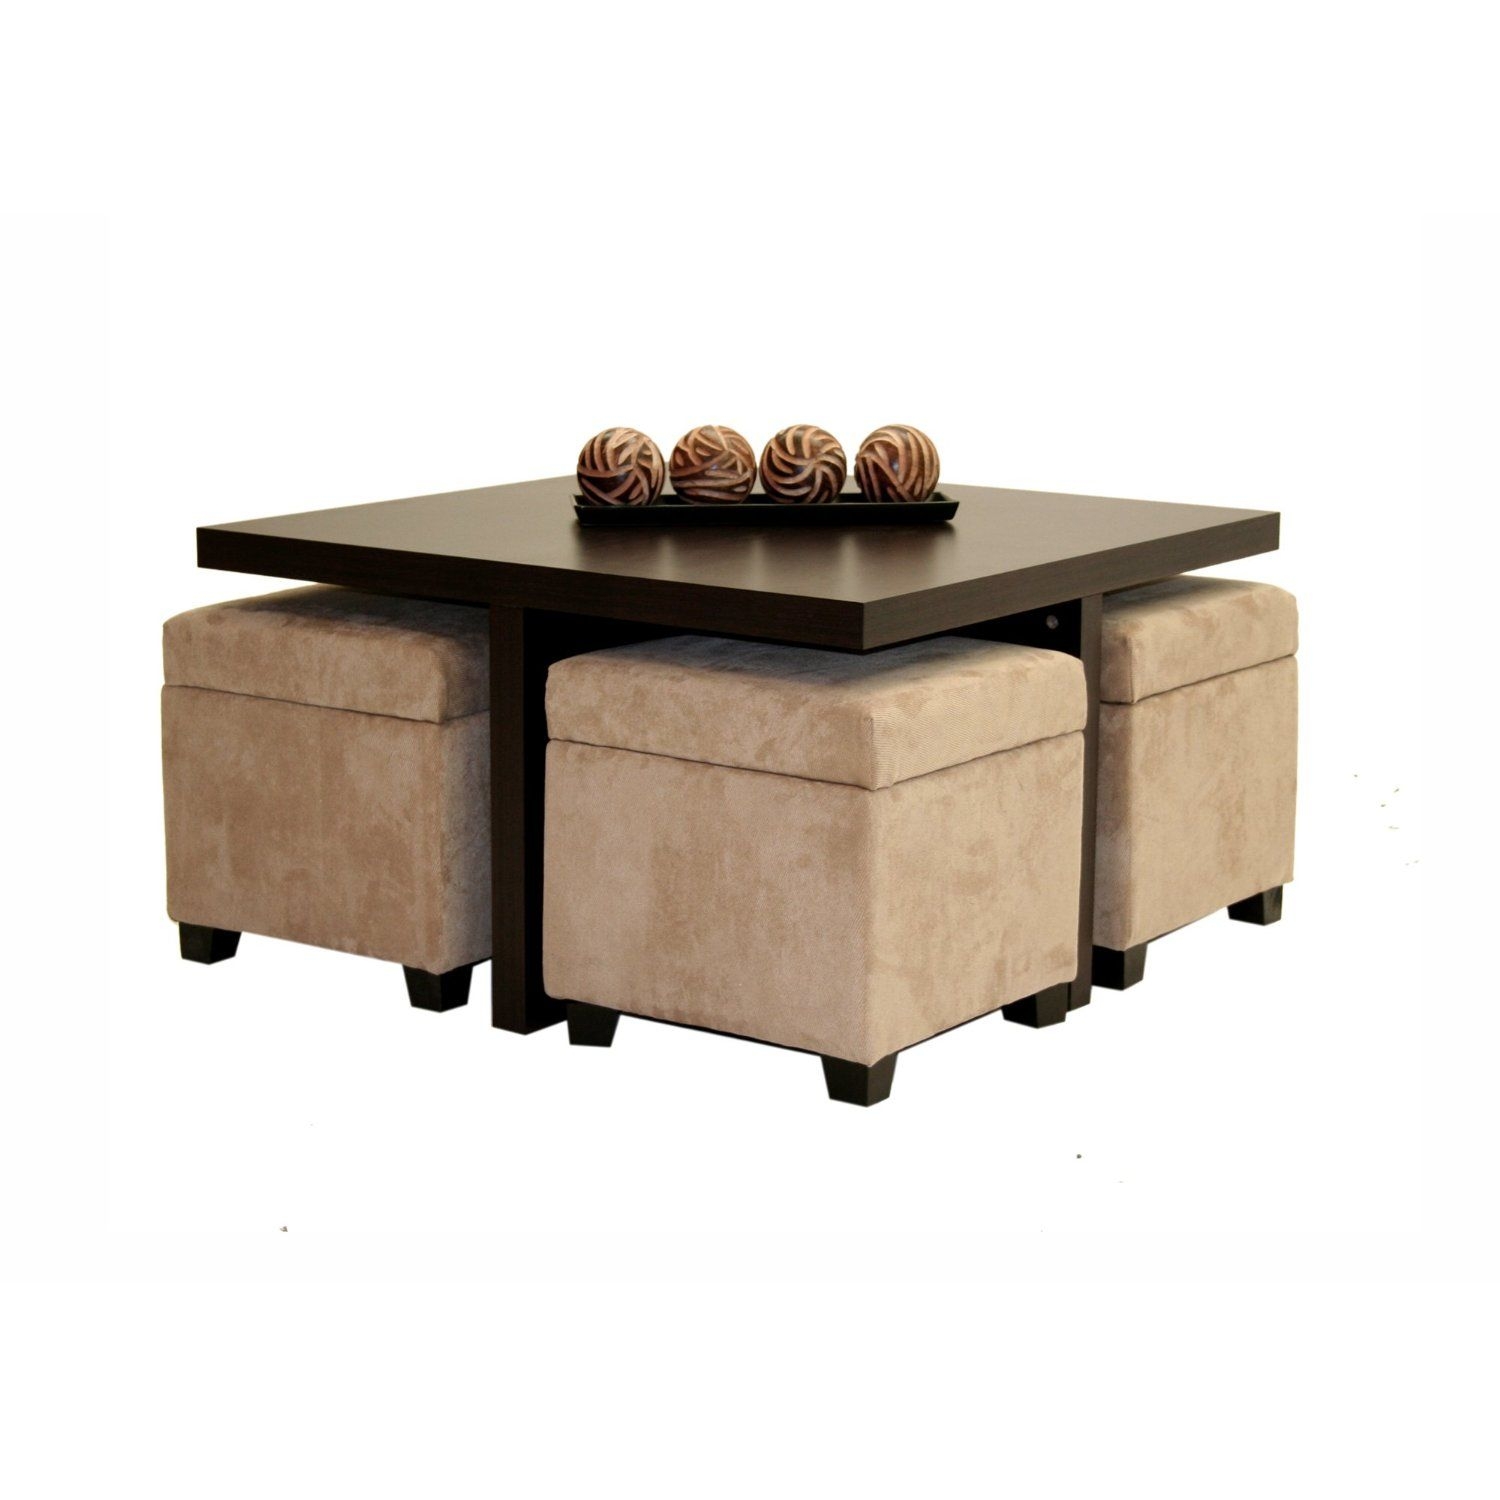 Coffee table with nesting ottomans